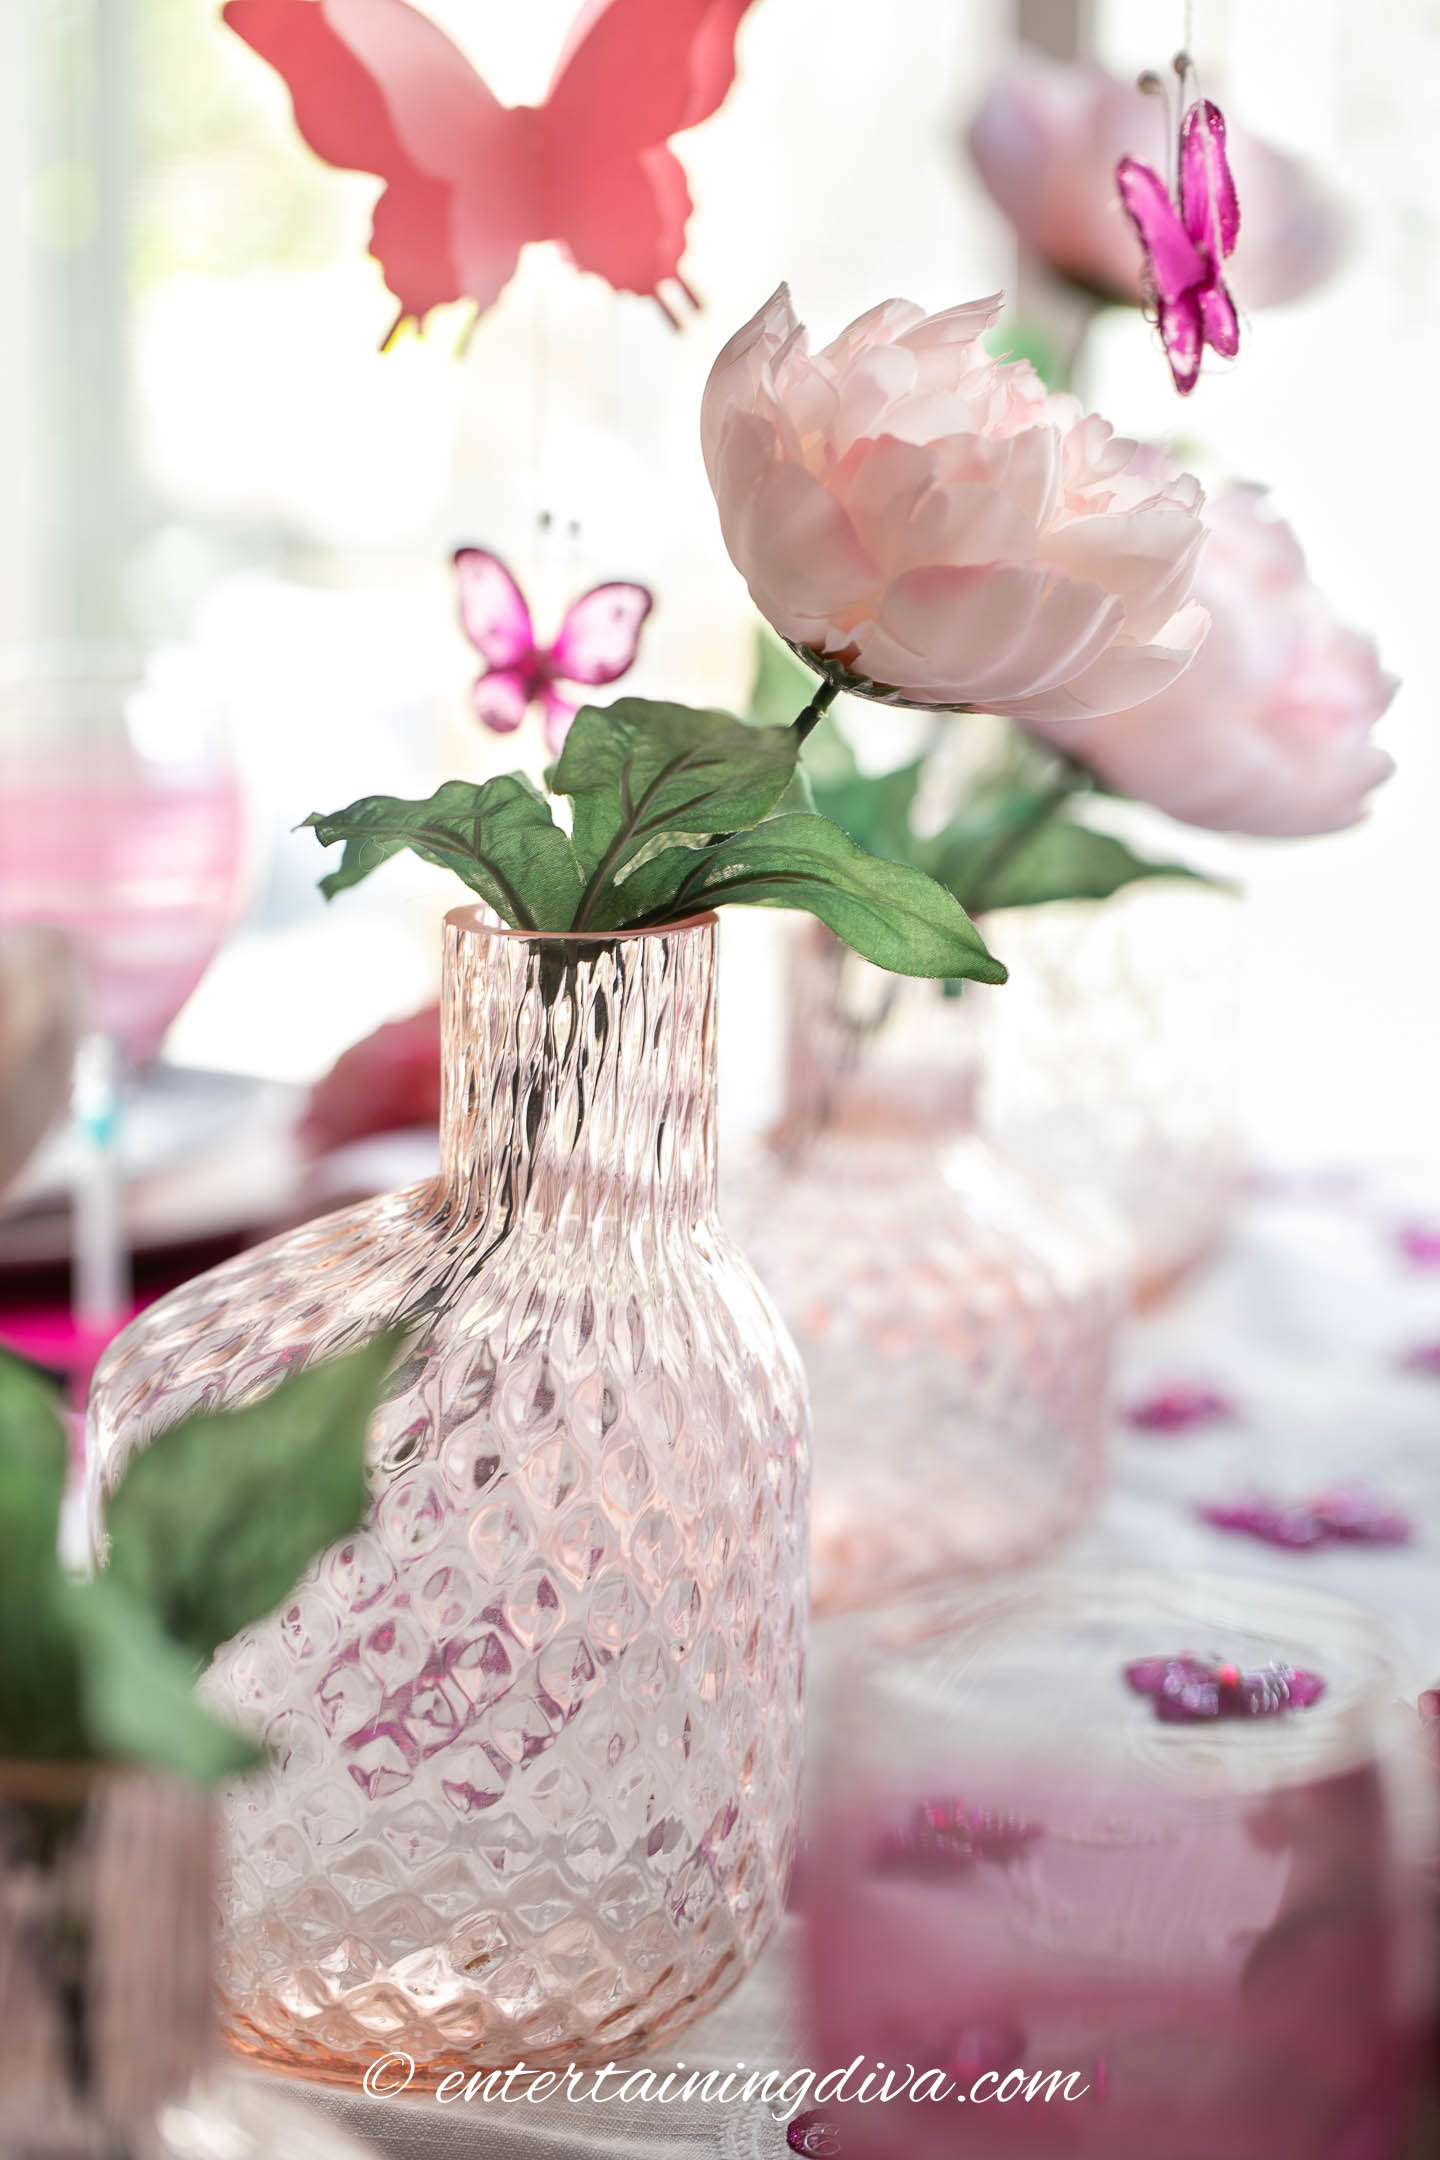 Table centerpiece with pink flowers in pink glass vases and butterflies hanging above them